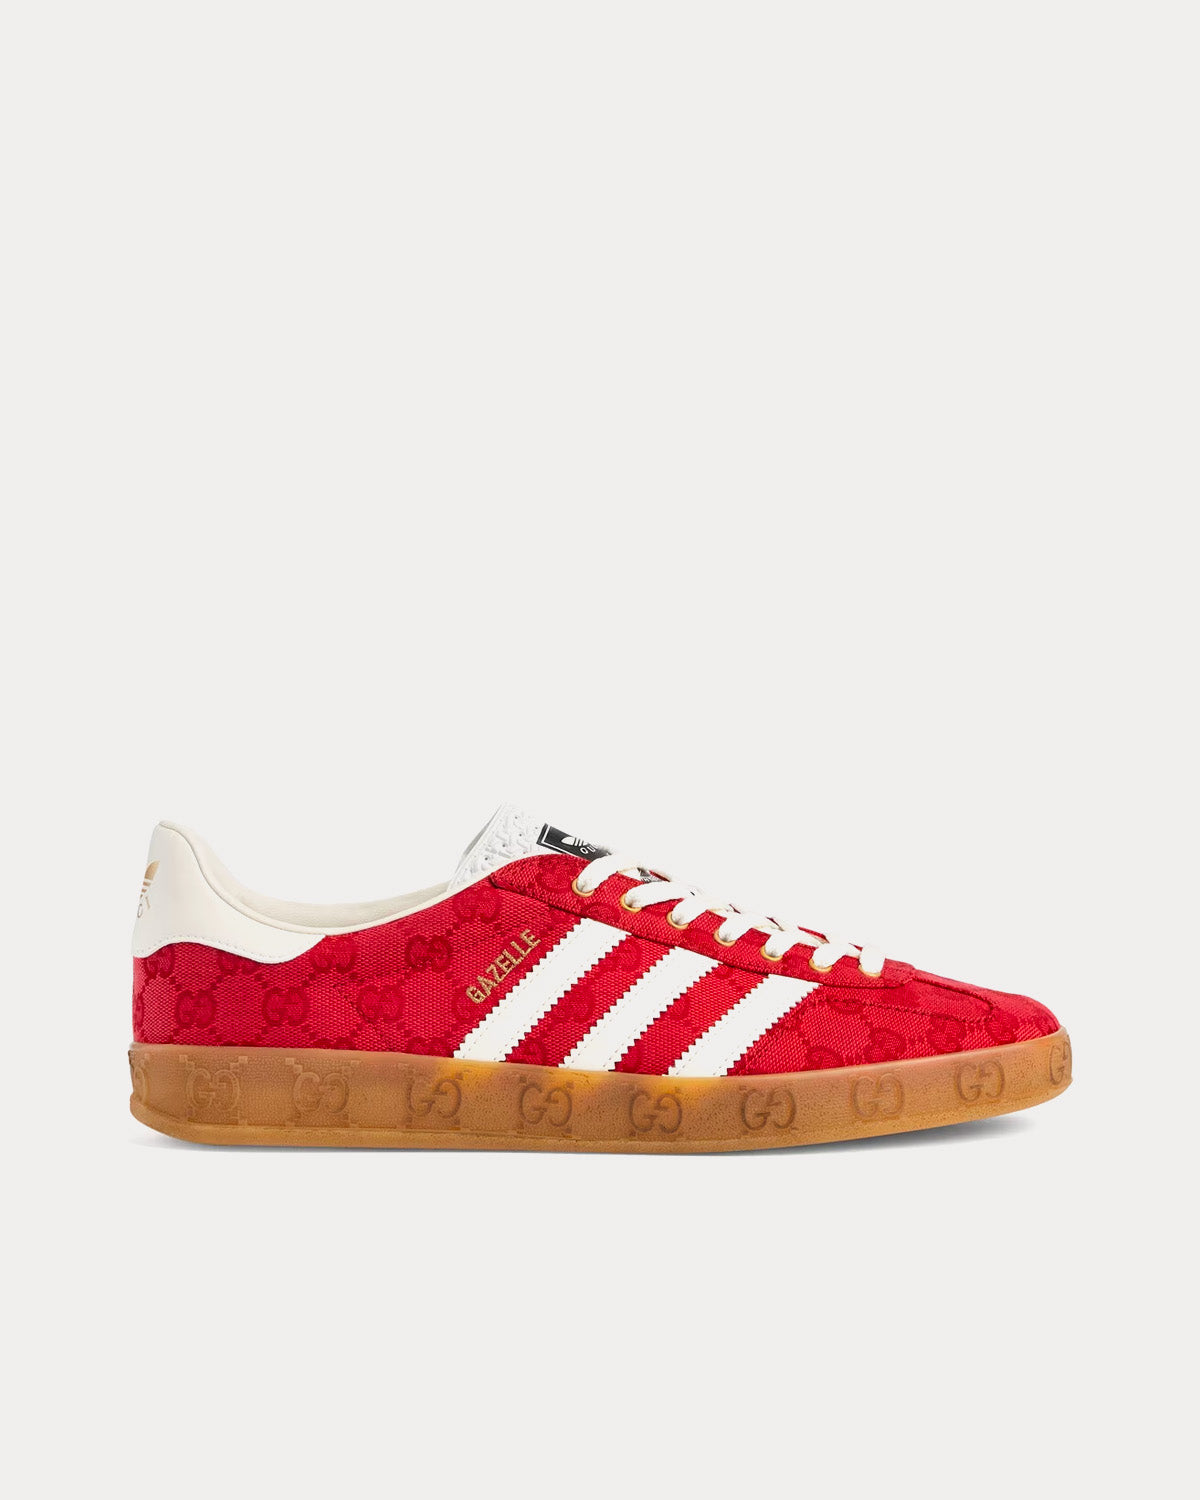 Adidas x Gucci - Gazelle Original GG Canvas red Low Top Sneakers